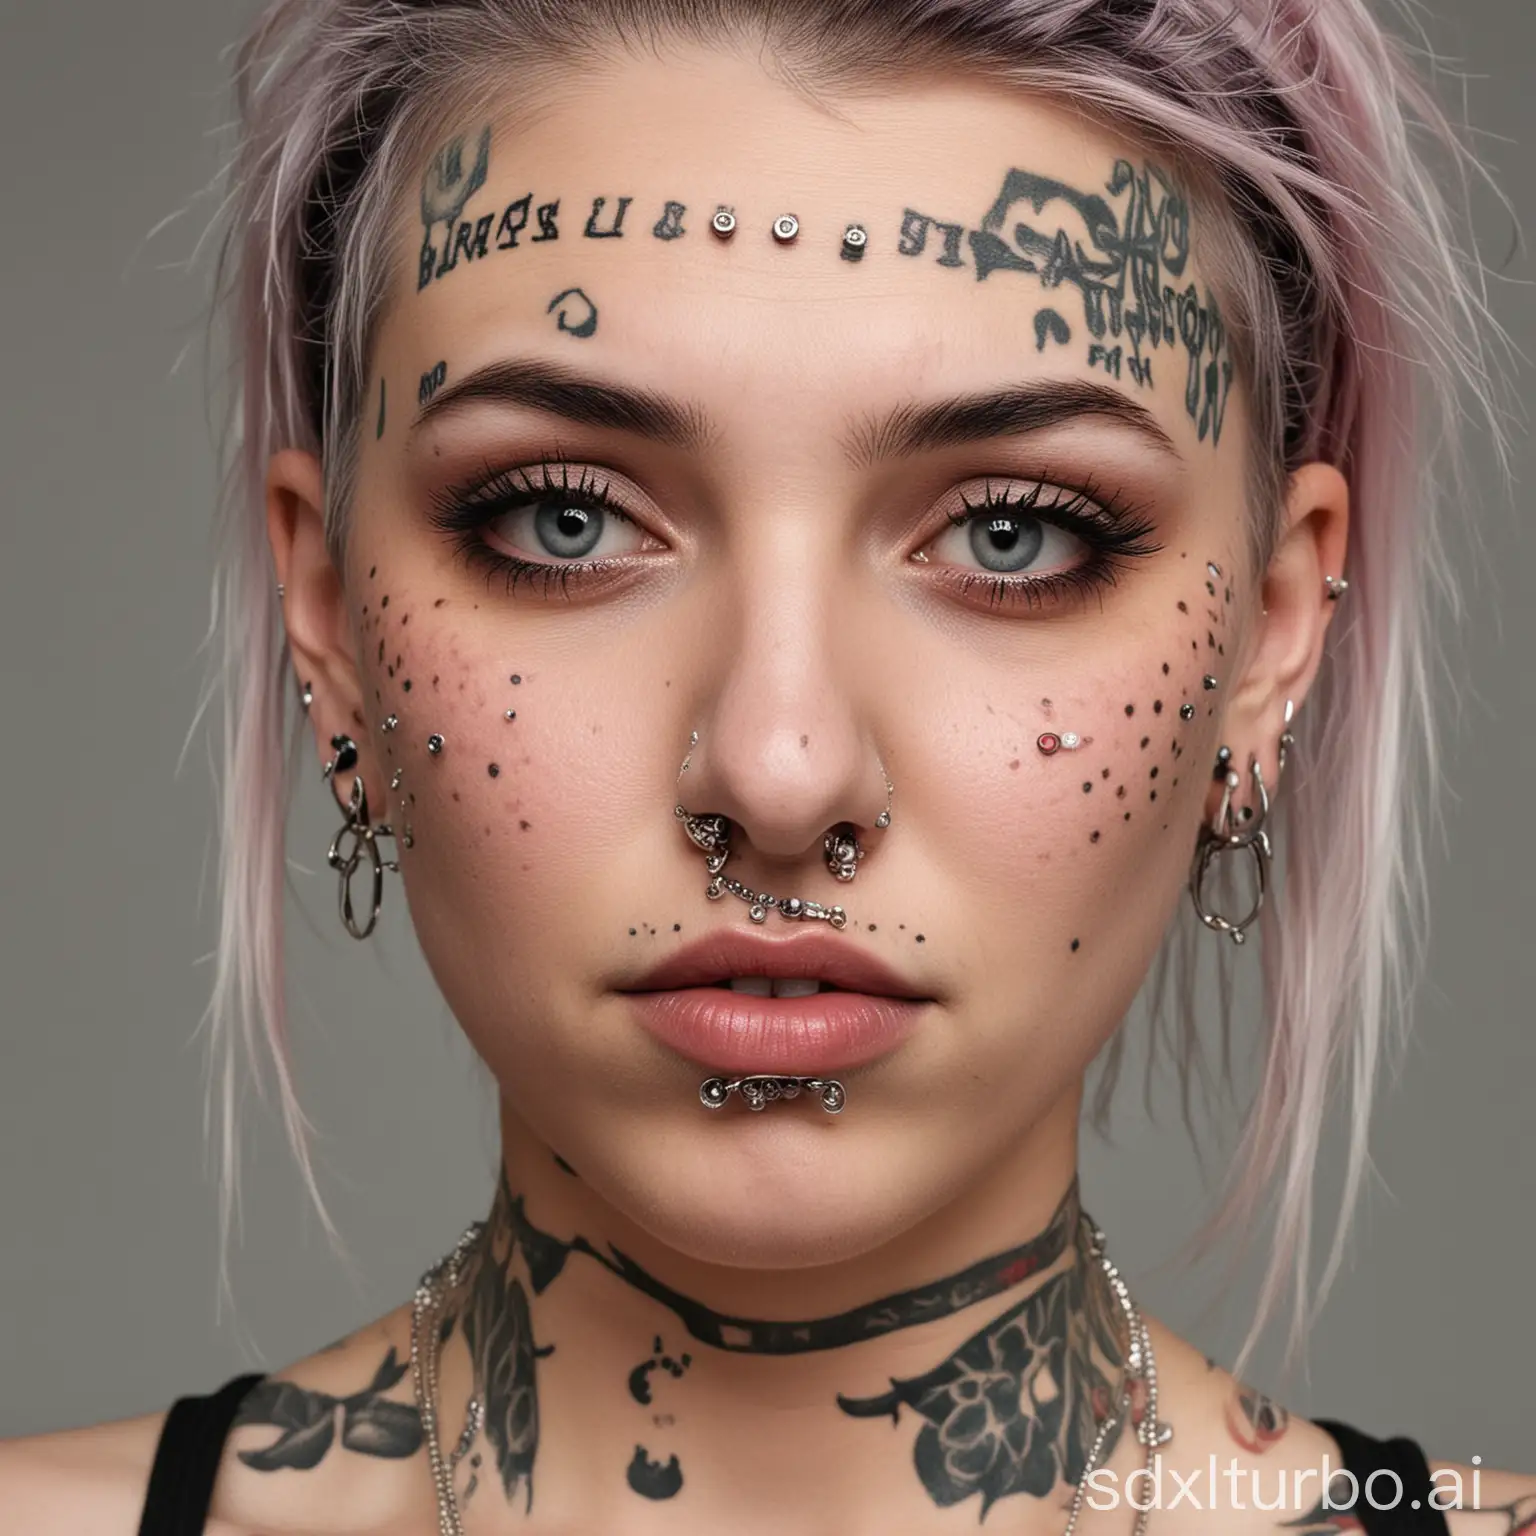 Excessive-Facial-Piercings-on-a-Woman